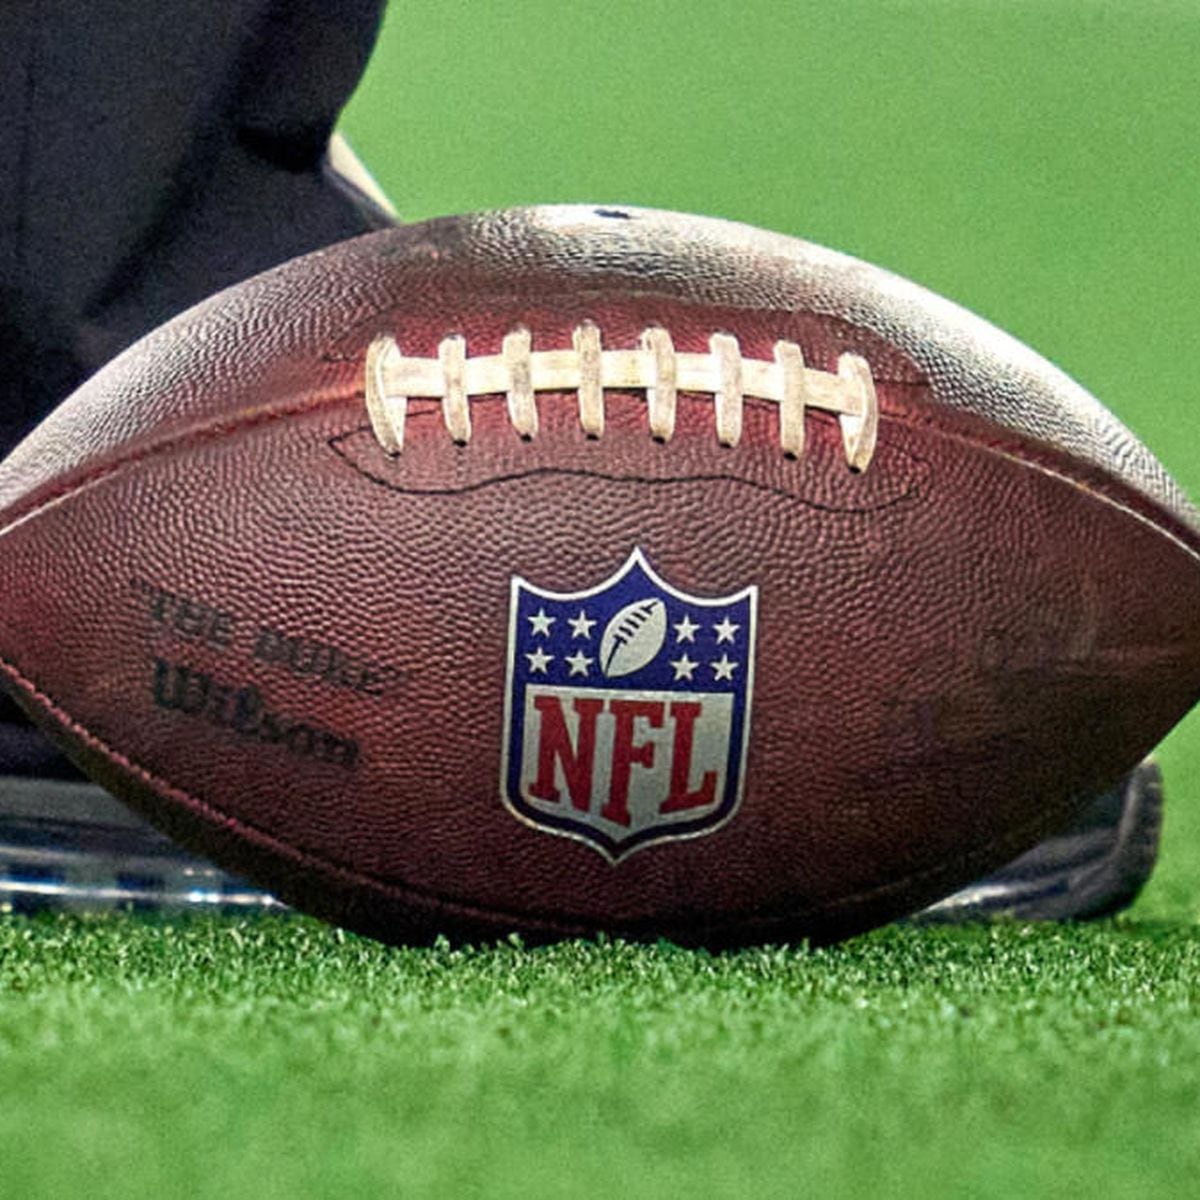 What NFL games are on  Prime and how can you watch them